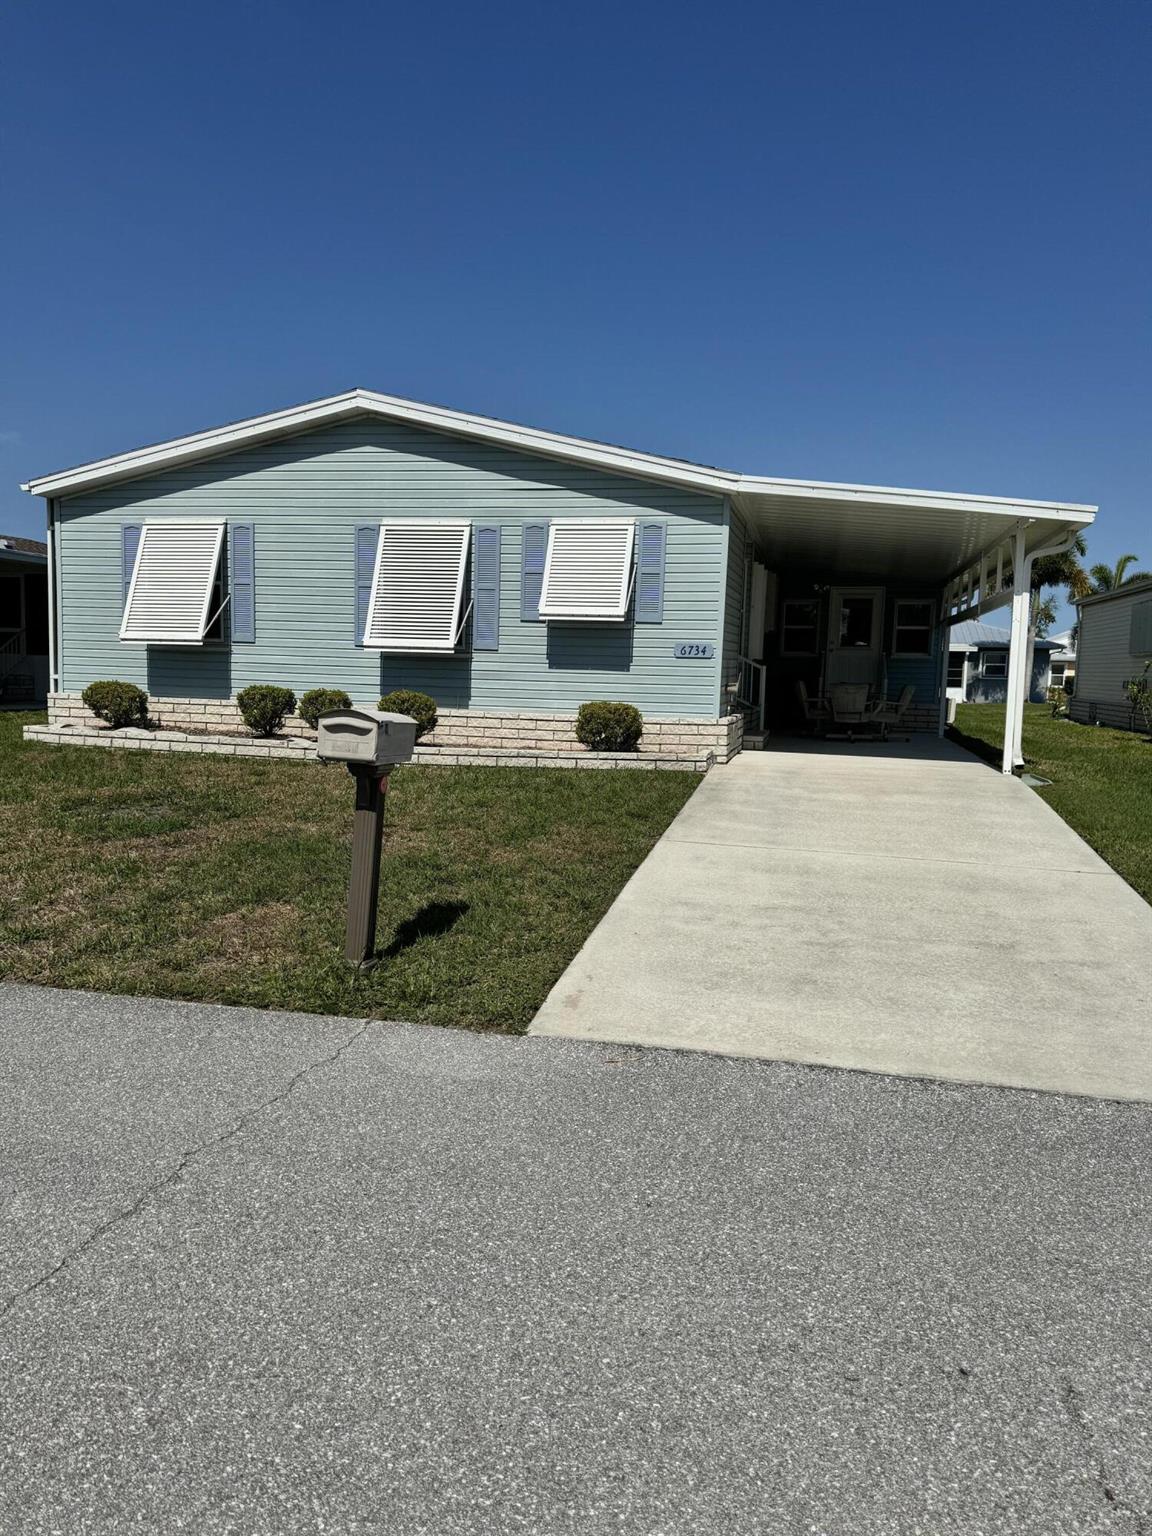 Must See! Very well kept lovely 2 bedroom 2 bath home with remodeled  Florida room. Florida room has been fully enclosed with hurricane windows, mini a/c unit with heat. Can be used as 3rd bedroom. Home has all new laminate flooring throughout. No carpet. Split floor plan. A/C is 2018. Water heater is 2021. Washer and Dryer is 2021. New appliances in kitchen. New king bed in Primary bedroom. New fans in bedrooms. Home is being sold furnished. Home has a lovely sitting area with table and chairs in carport. as well as a shed in back of home and big backyard. Spanish Lakes is 55+ community. Private 18 hole golf course, 2 pools, pickle ball, tennis, shuffleboard, bocce, gym, library, wood workshop and much more.